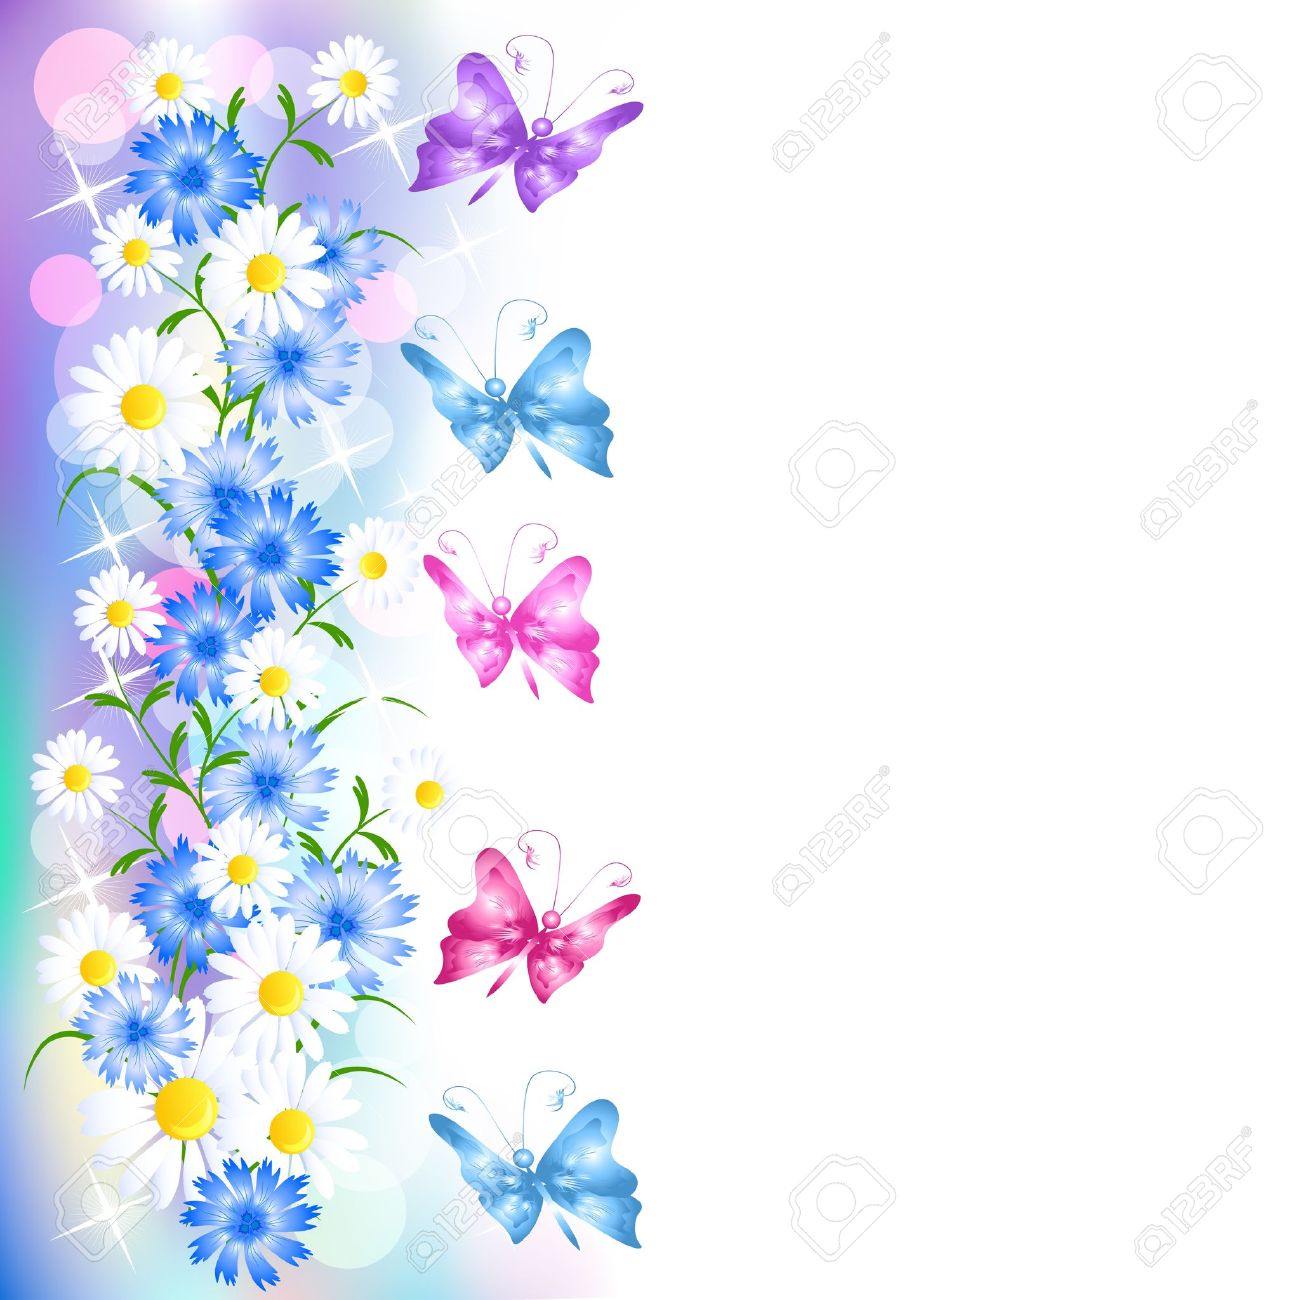 Clipart flowers and.